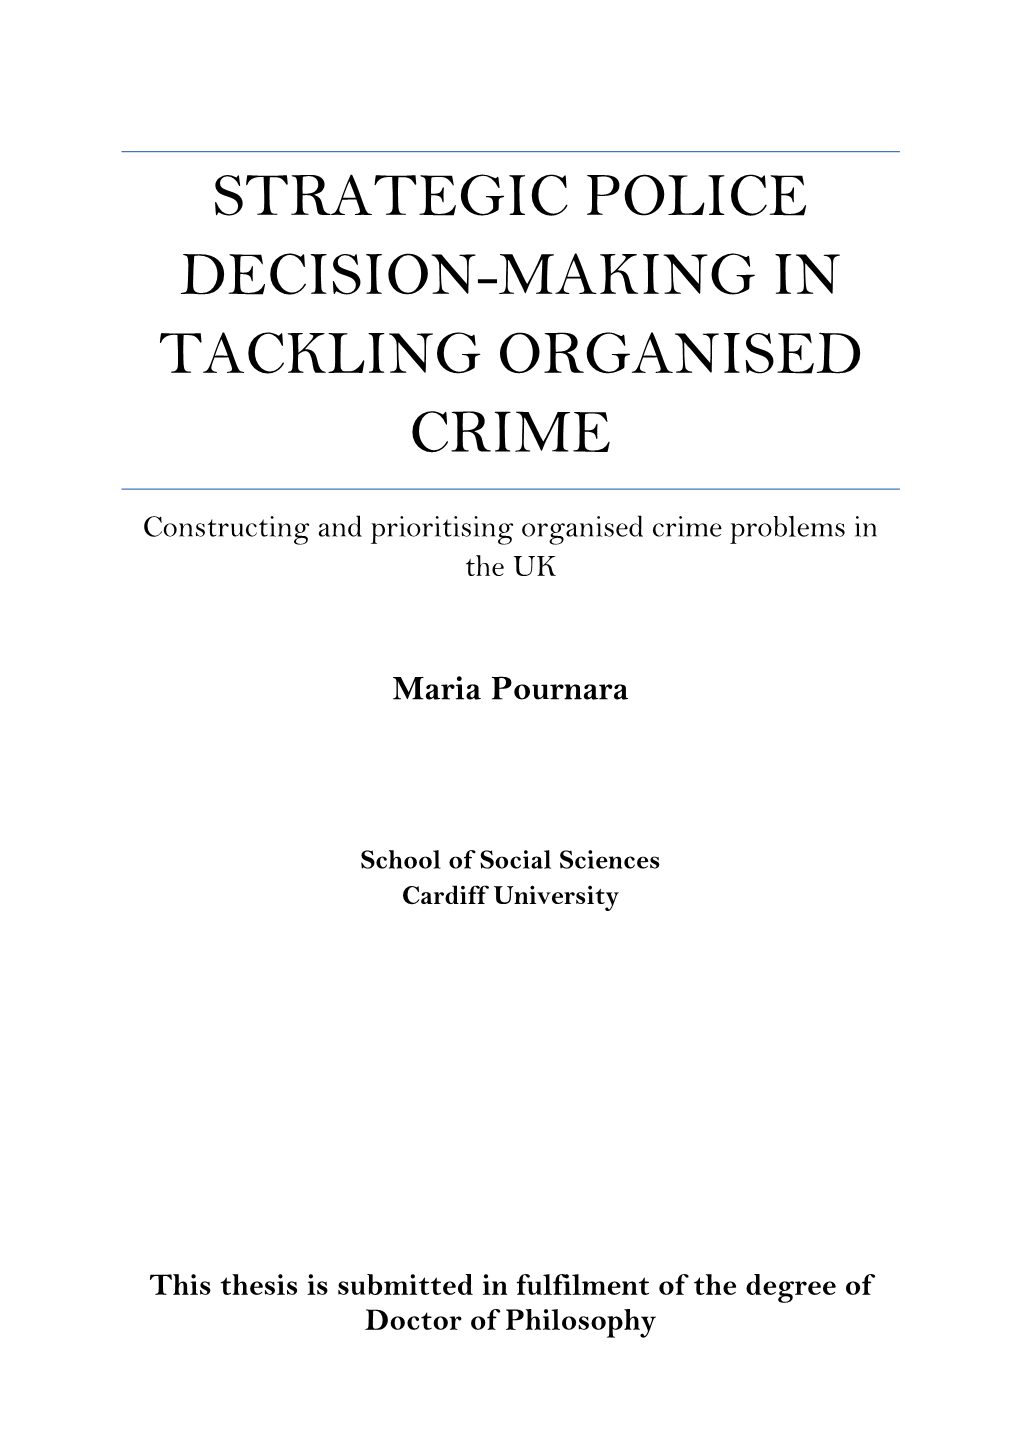 Strategic Police Decision-Making in Tackling Organised Crime